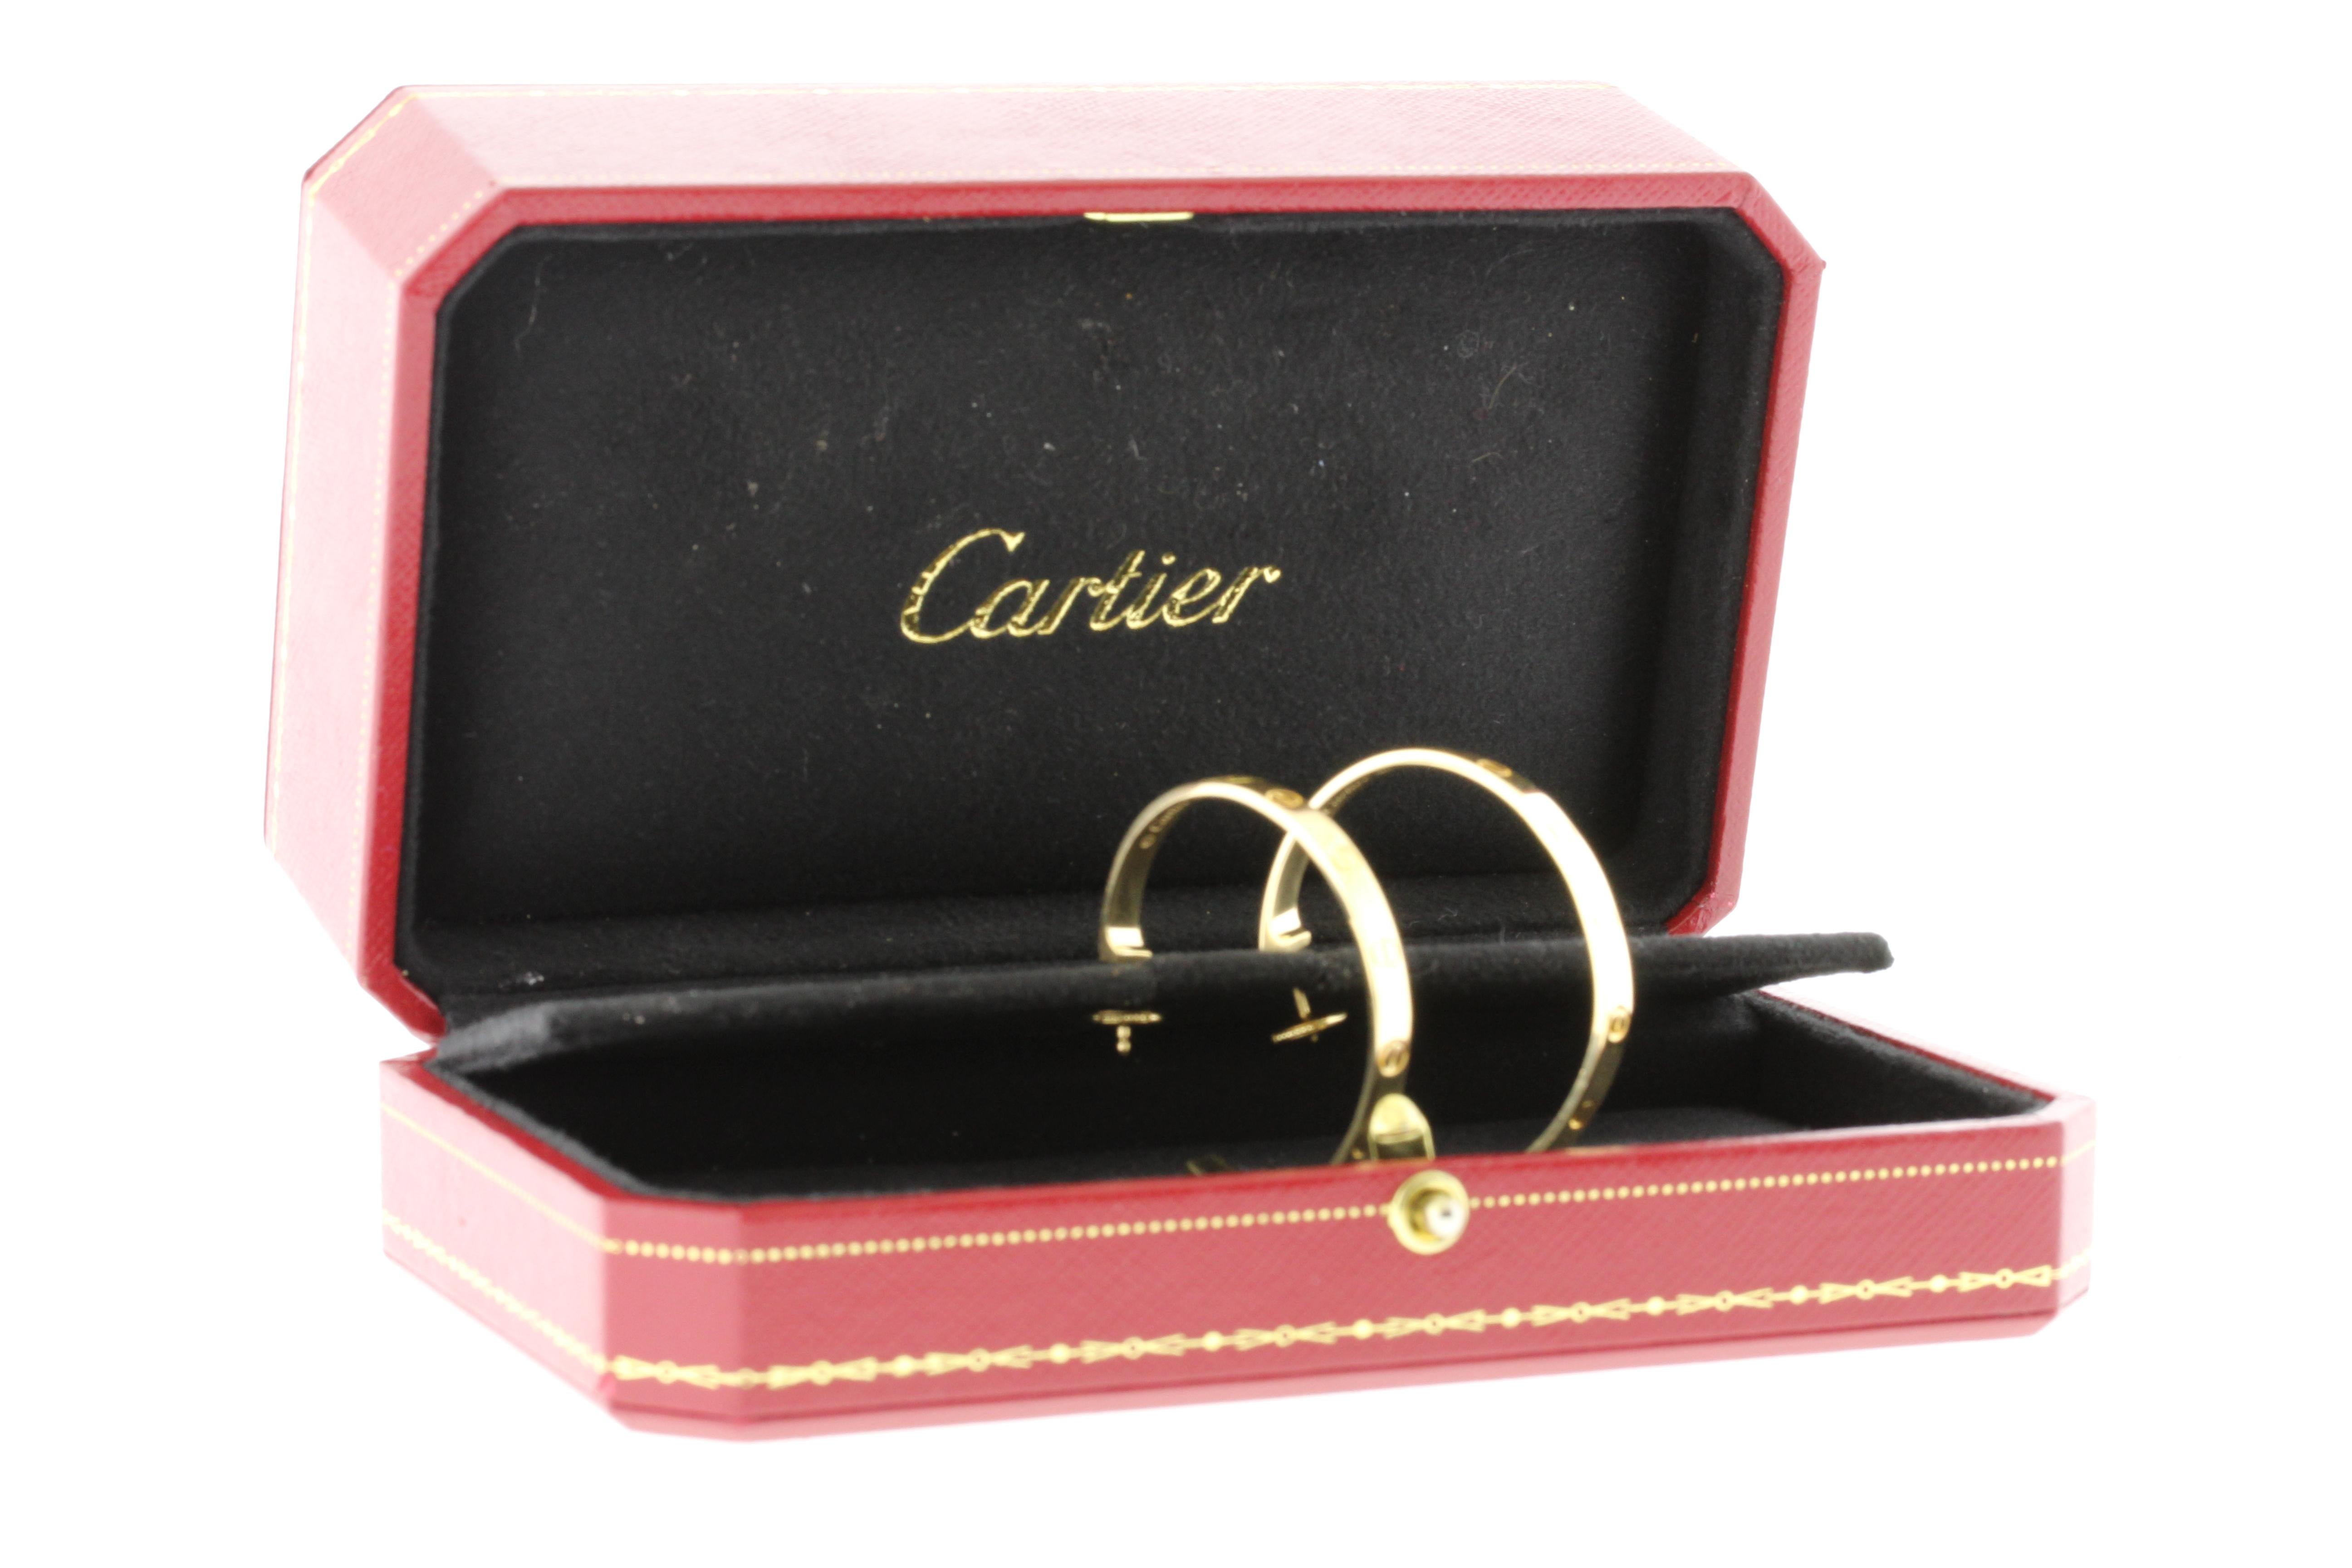 From the Cartier Love collection, these yellow gold hoops are iconic.
♦ Designer: Cartier
♦ Width: 3.6mm
♦ Inner Diameter: 32.6mm
♦ Metal: 18 karat yellow gold
♦ Circa 2021
♦ Packaging: Cartier Box
♦ Condition: Excellent , pre-owned